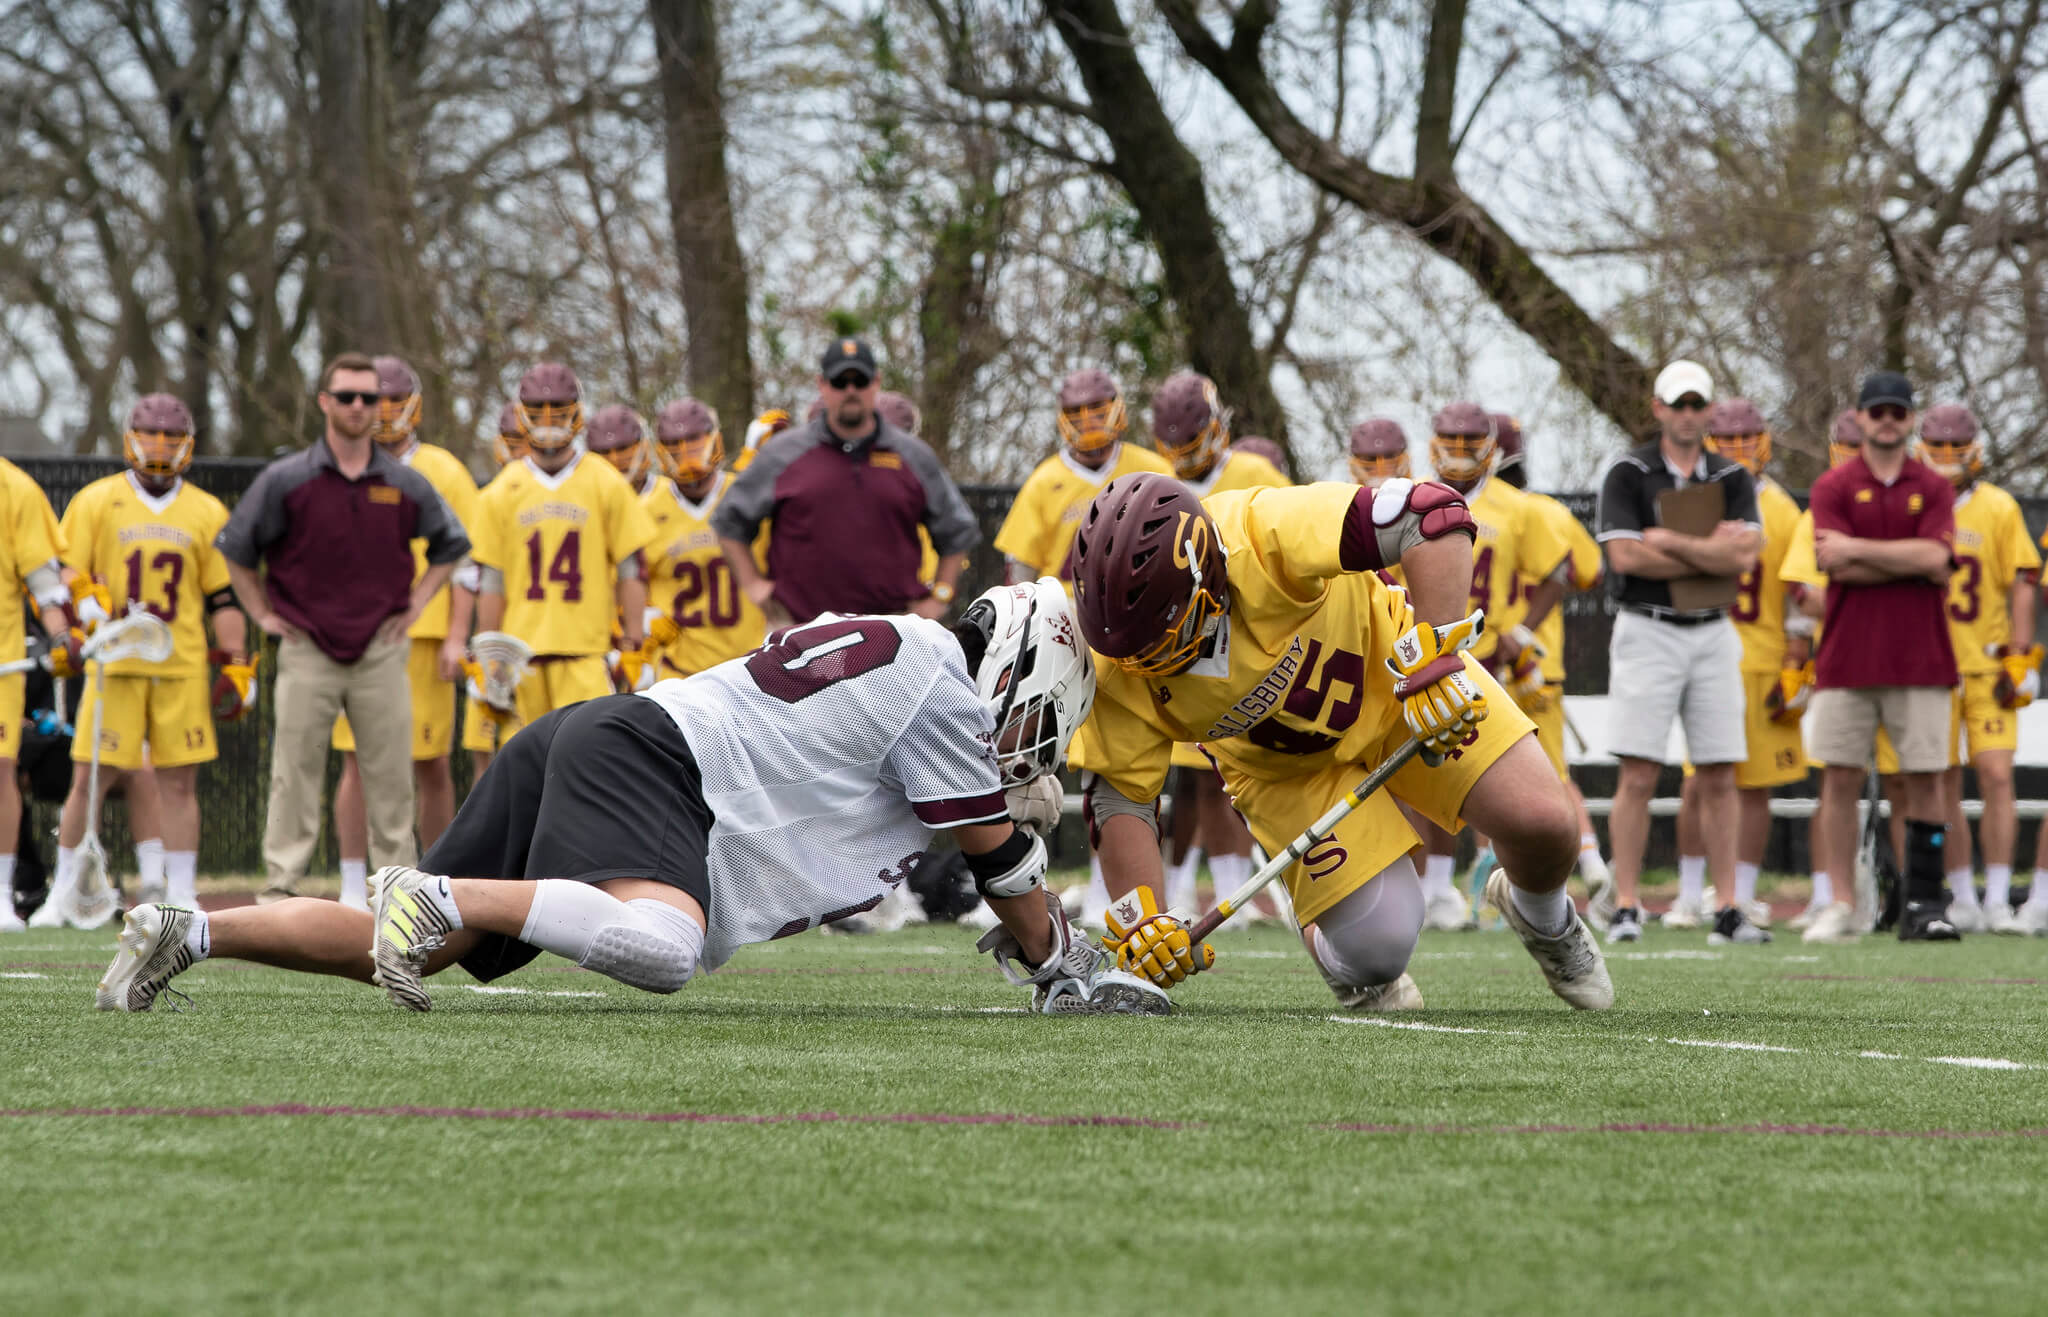 Washington College men's lacrosse faces off agaisnt rival, Salisbury in the 2019 War on the Shore match-up